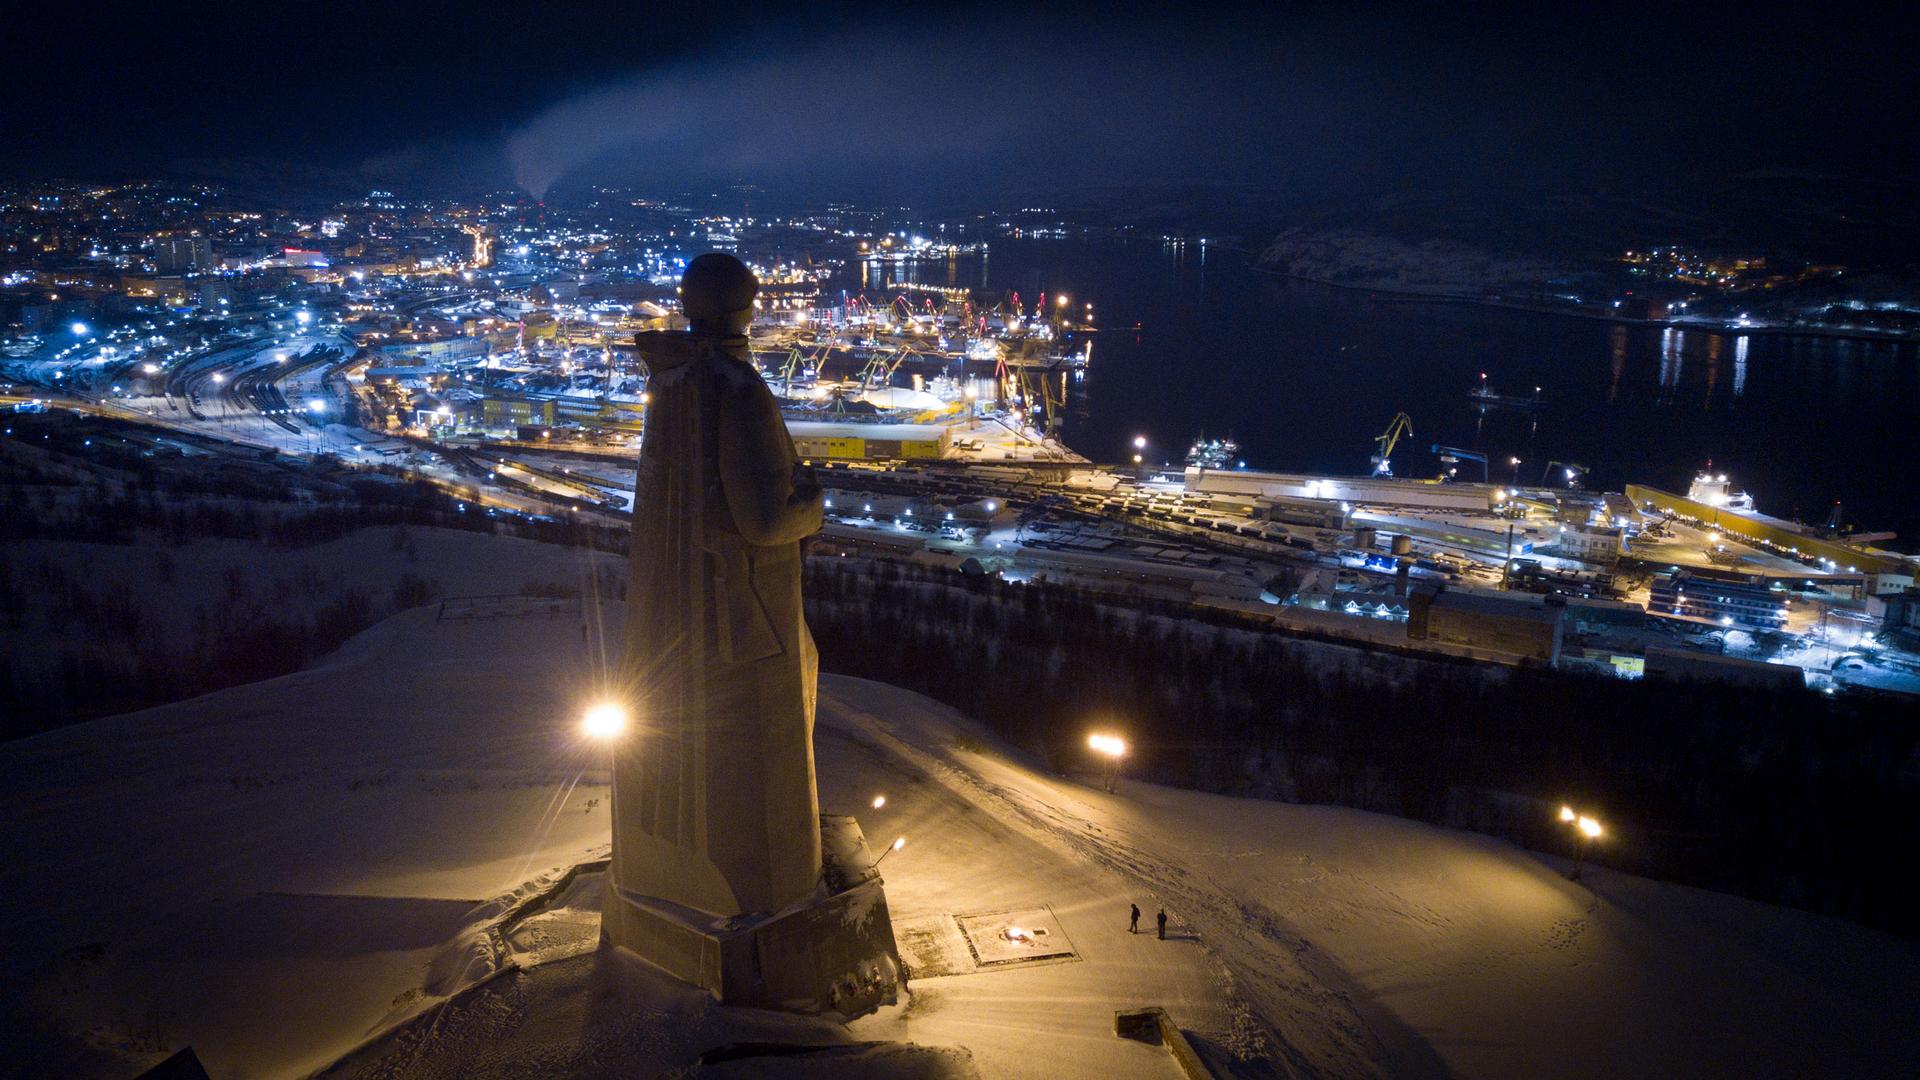 The Alyosha monument stands looking out over Murmansk off in the distance on a dark night.